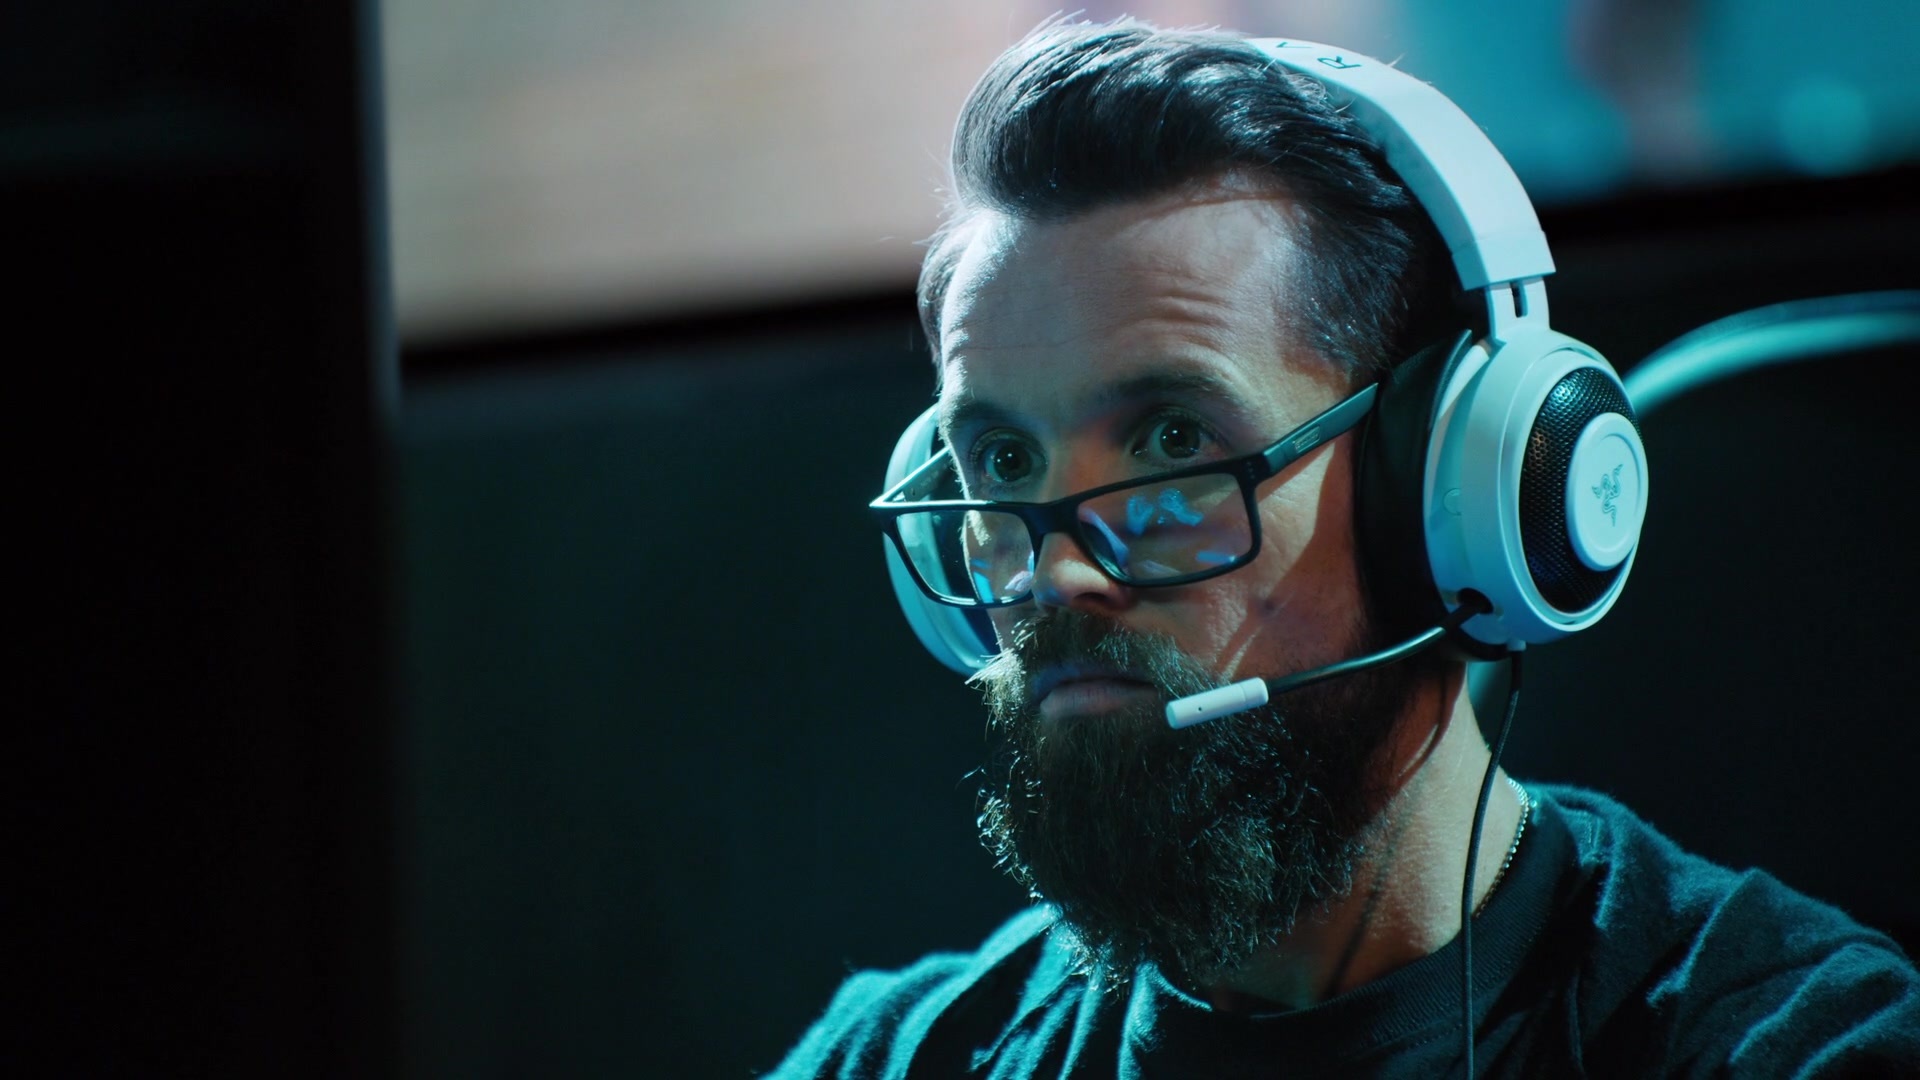 Razer White Gaming Headset Used By Rob McElhenney As Ian Grimm In Mythic Quest: Raven's Banquet Season 1 Episode 7 1920x1080